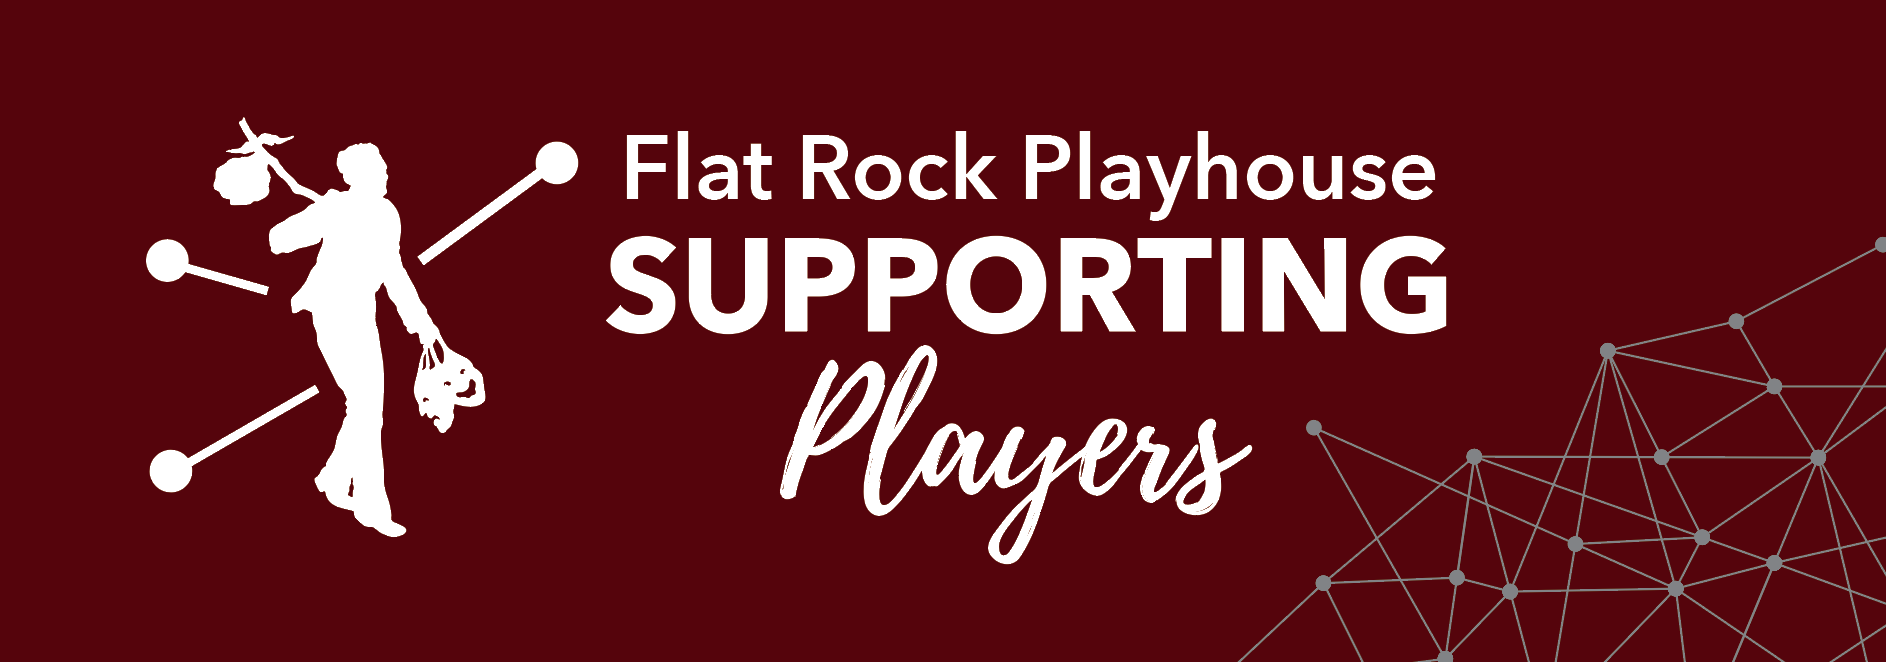 Flat Rock Playhouse Supporting
            Players